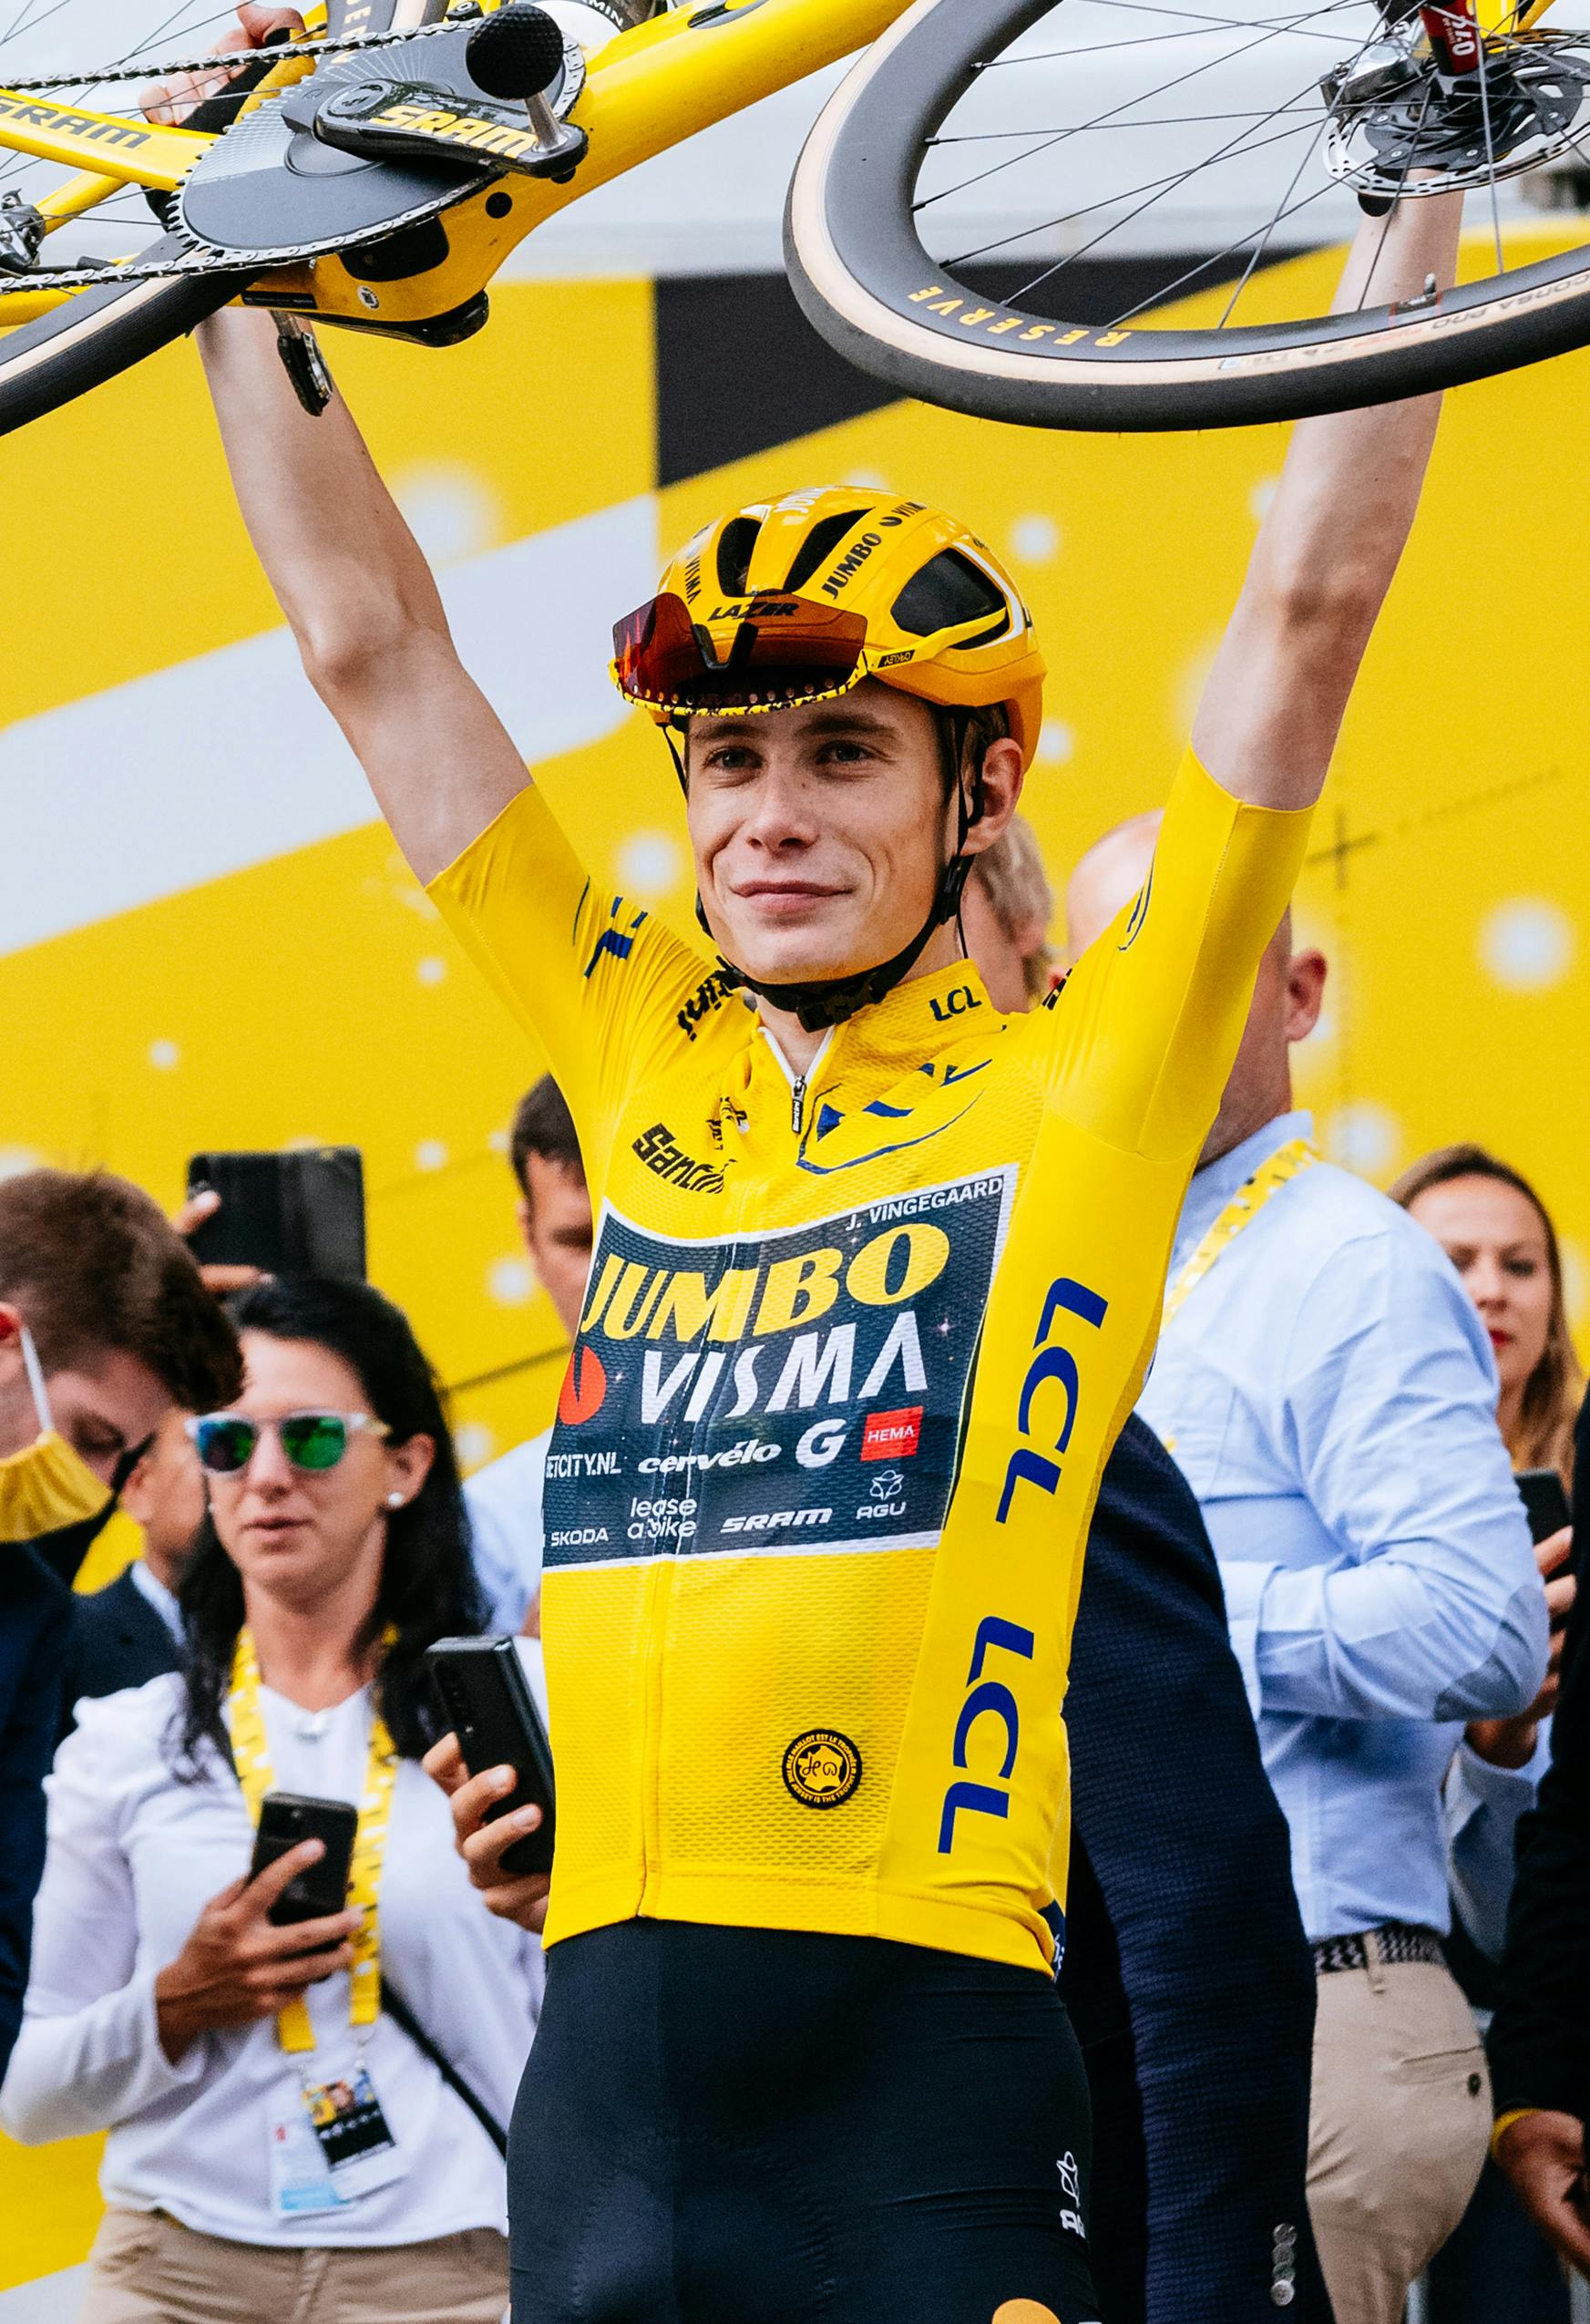 Jonas Vingegaard lifts his special-edition yellow Cervélo S5 above his head in a celebration of victory.